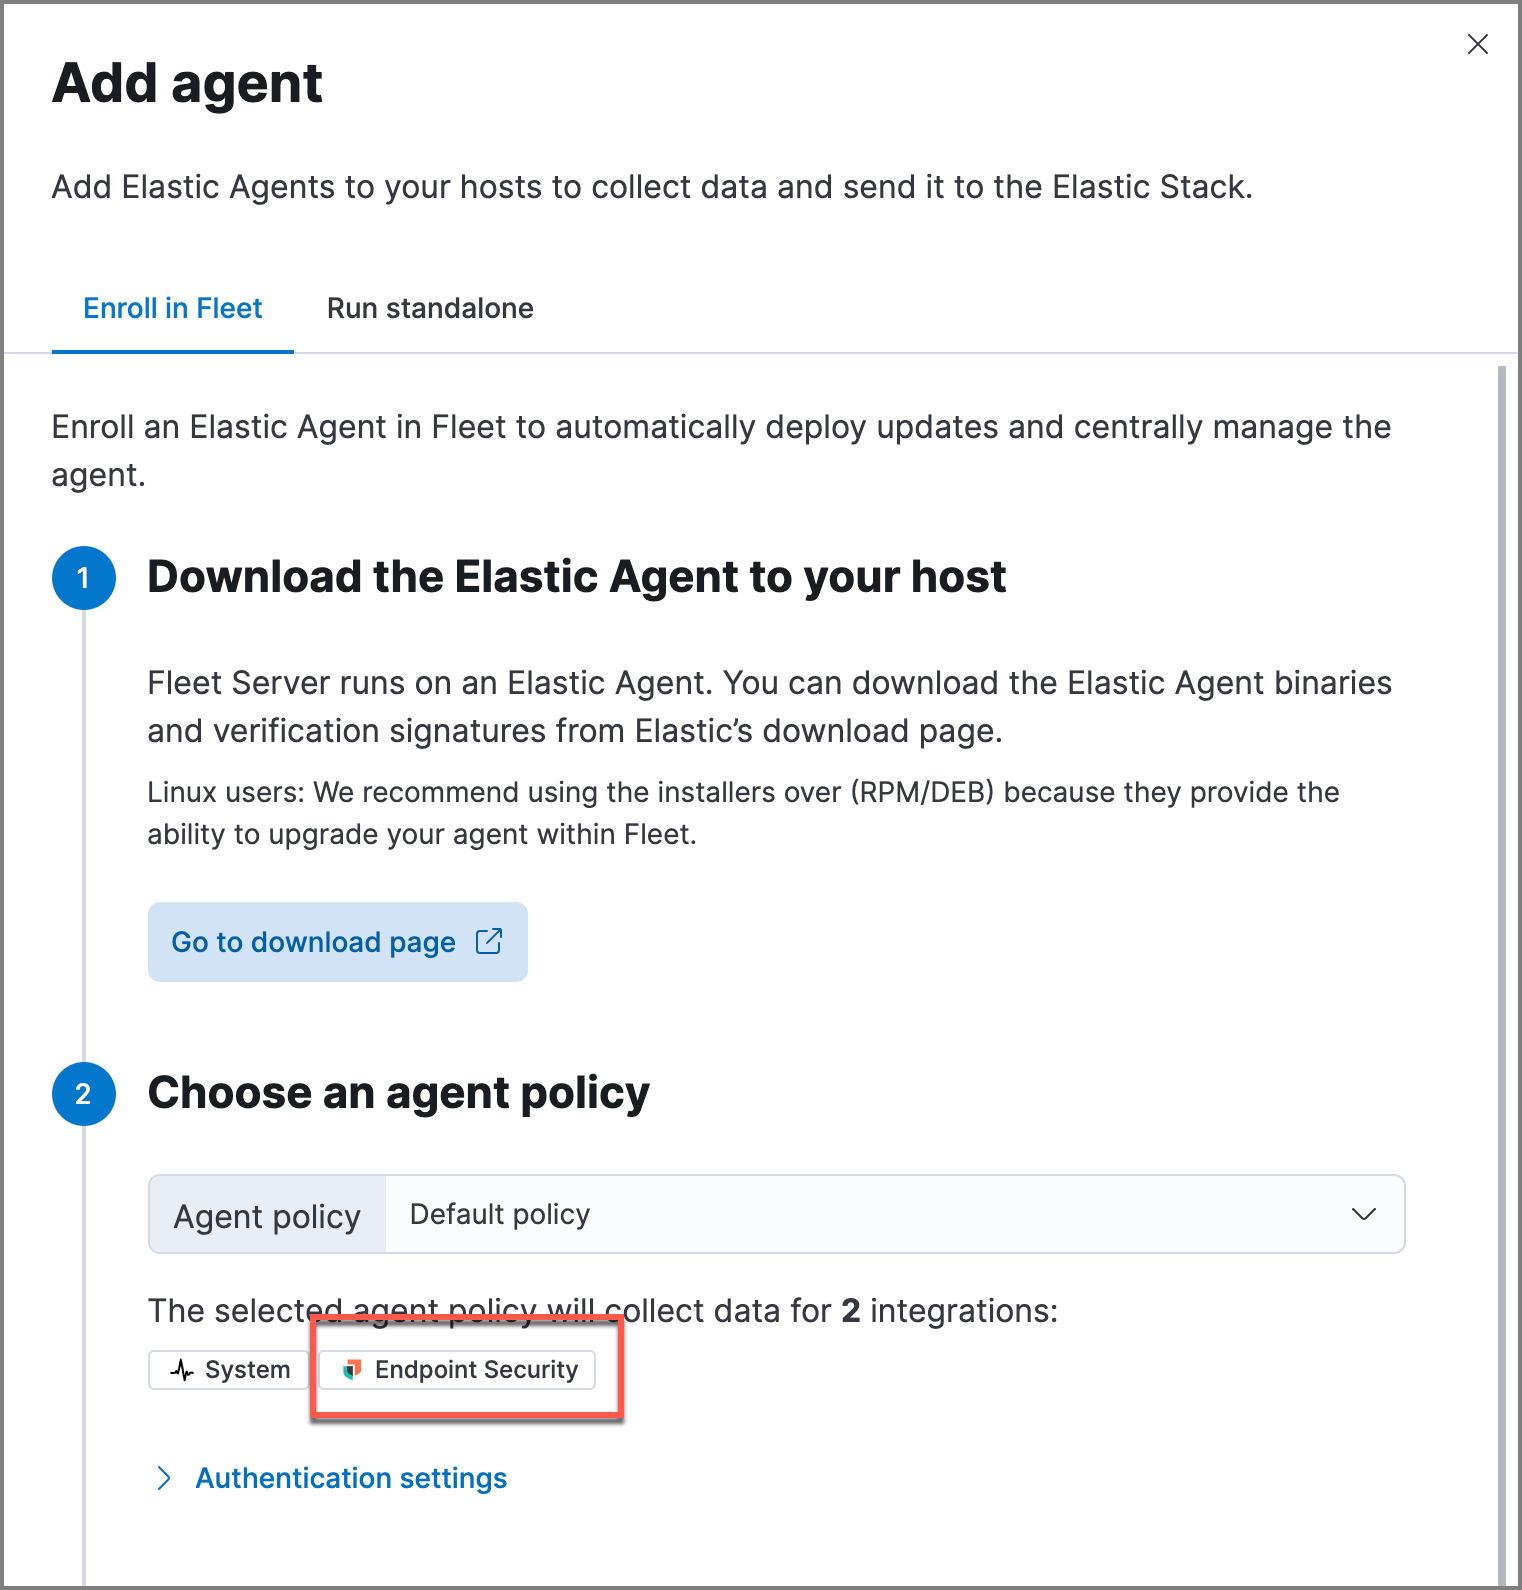 Elastic Endpoint Security (free)